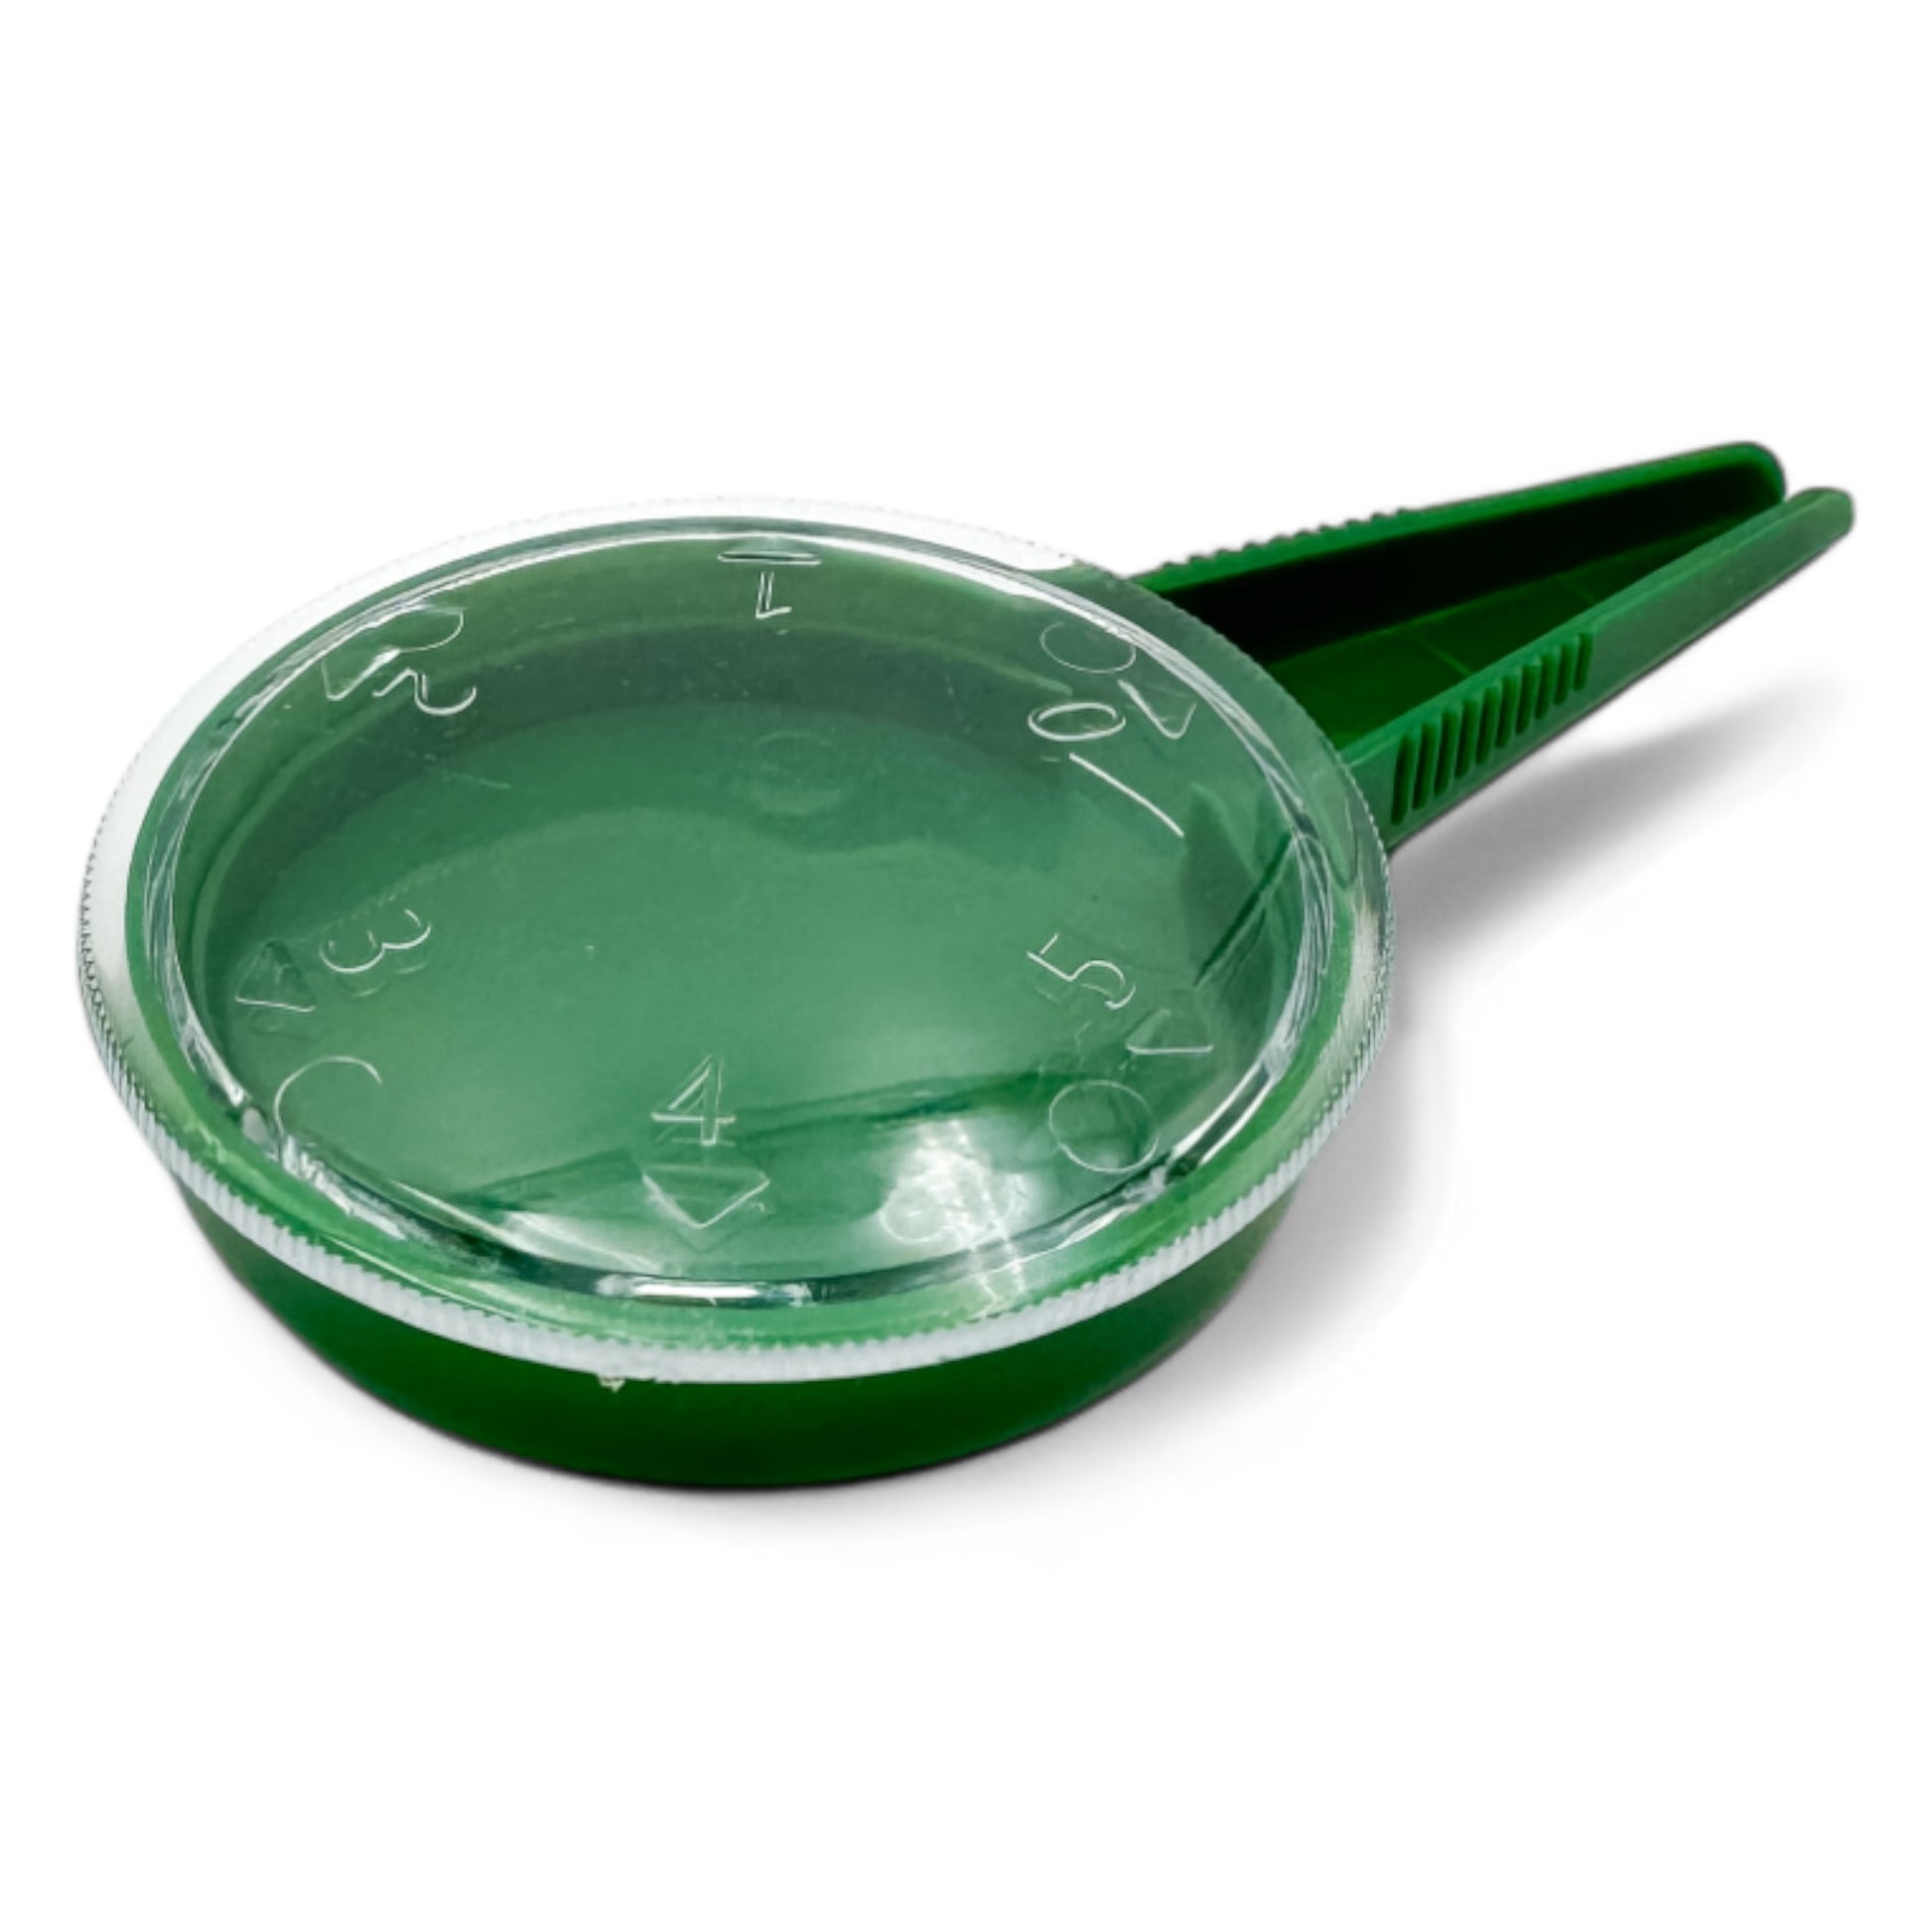 Green seed dispenser with lid and dispensing spoon on white surface